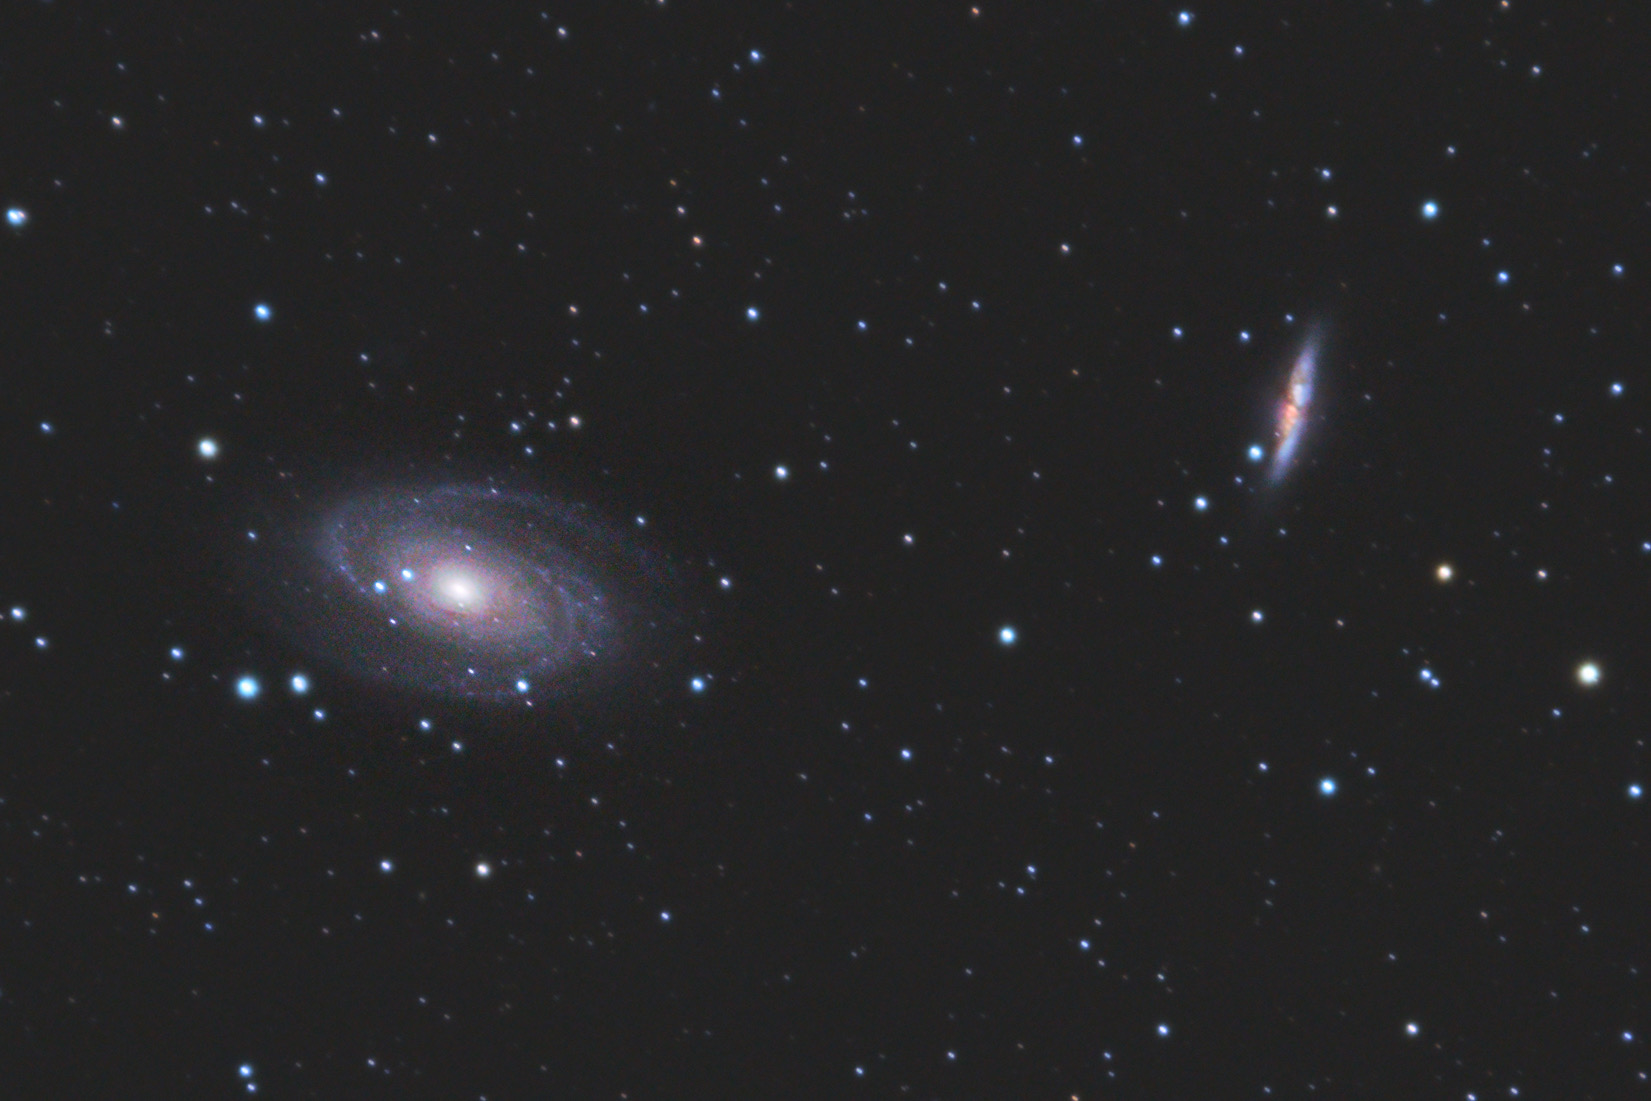 18 - (Bode’s Galaxy) and M82 (The Cigar Galaxy)